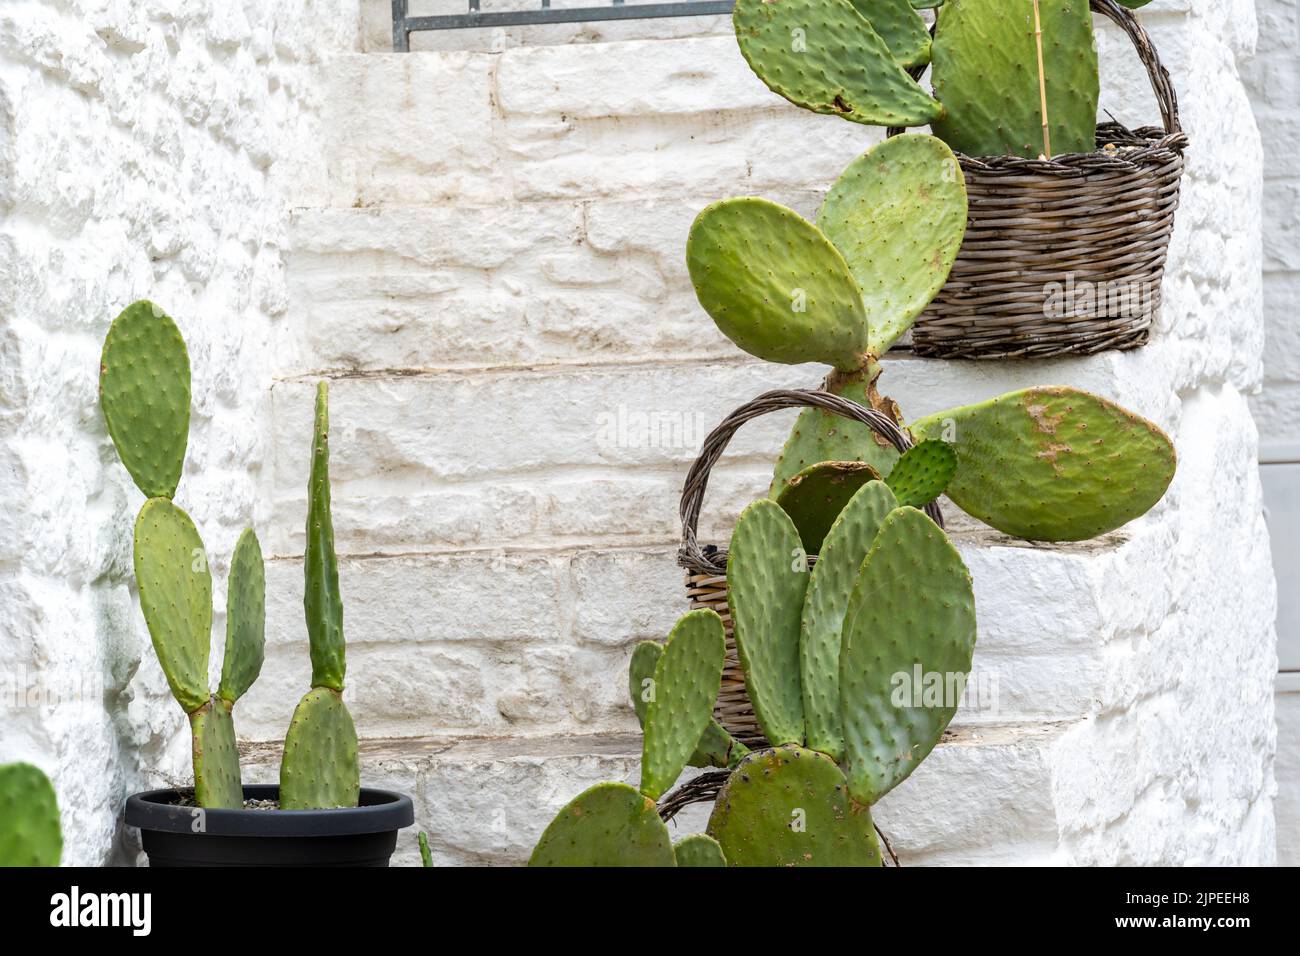 Prickly pear cactus (Opuntia ficus-indica, also known as Indian fig opuntia, barbary fig, cactus pear, spineless cactus) in Alberobello Puglia Stock Photo